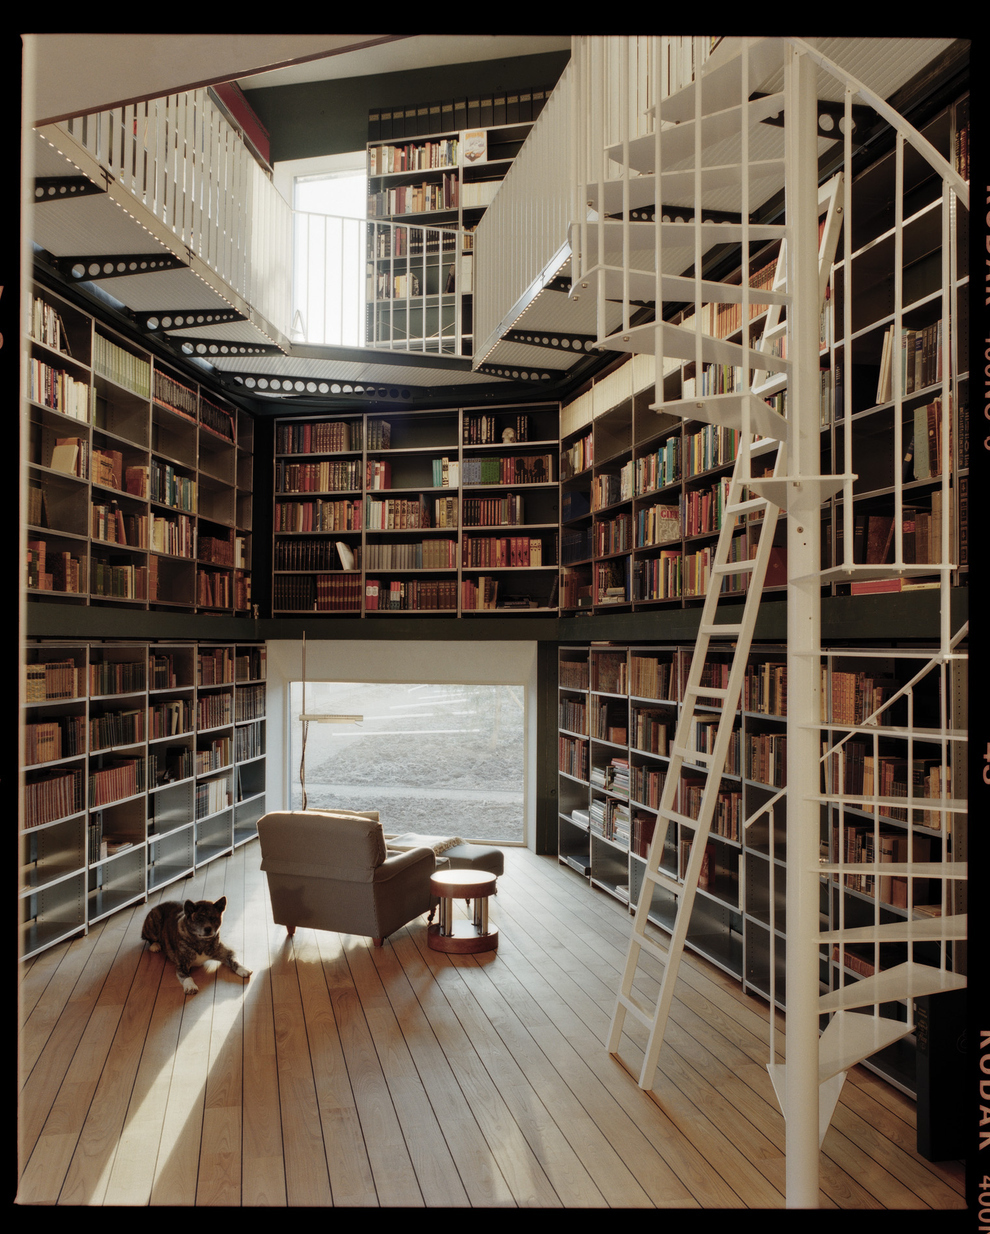 This person's amazing home library: